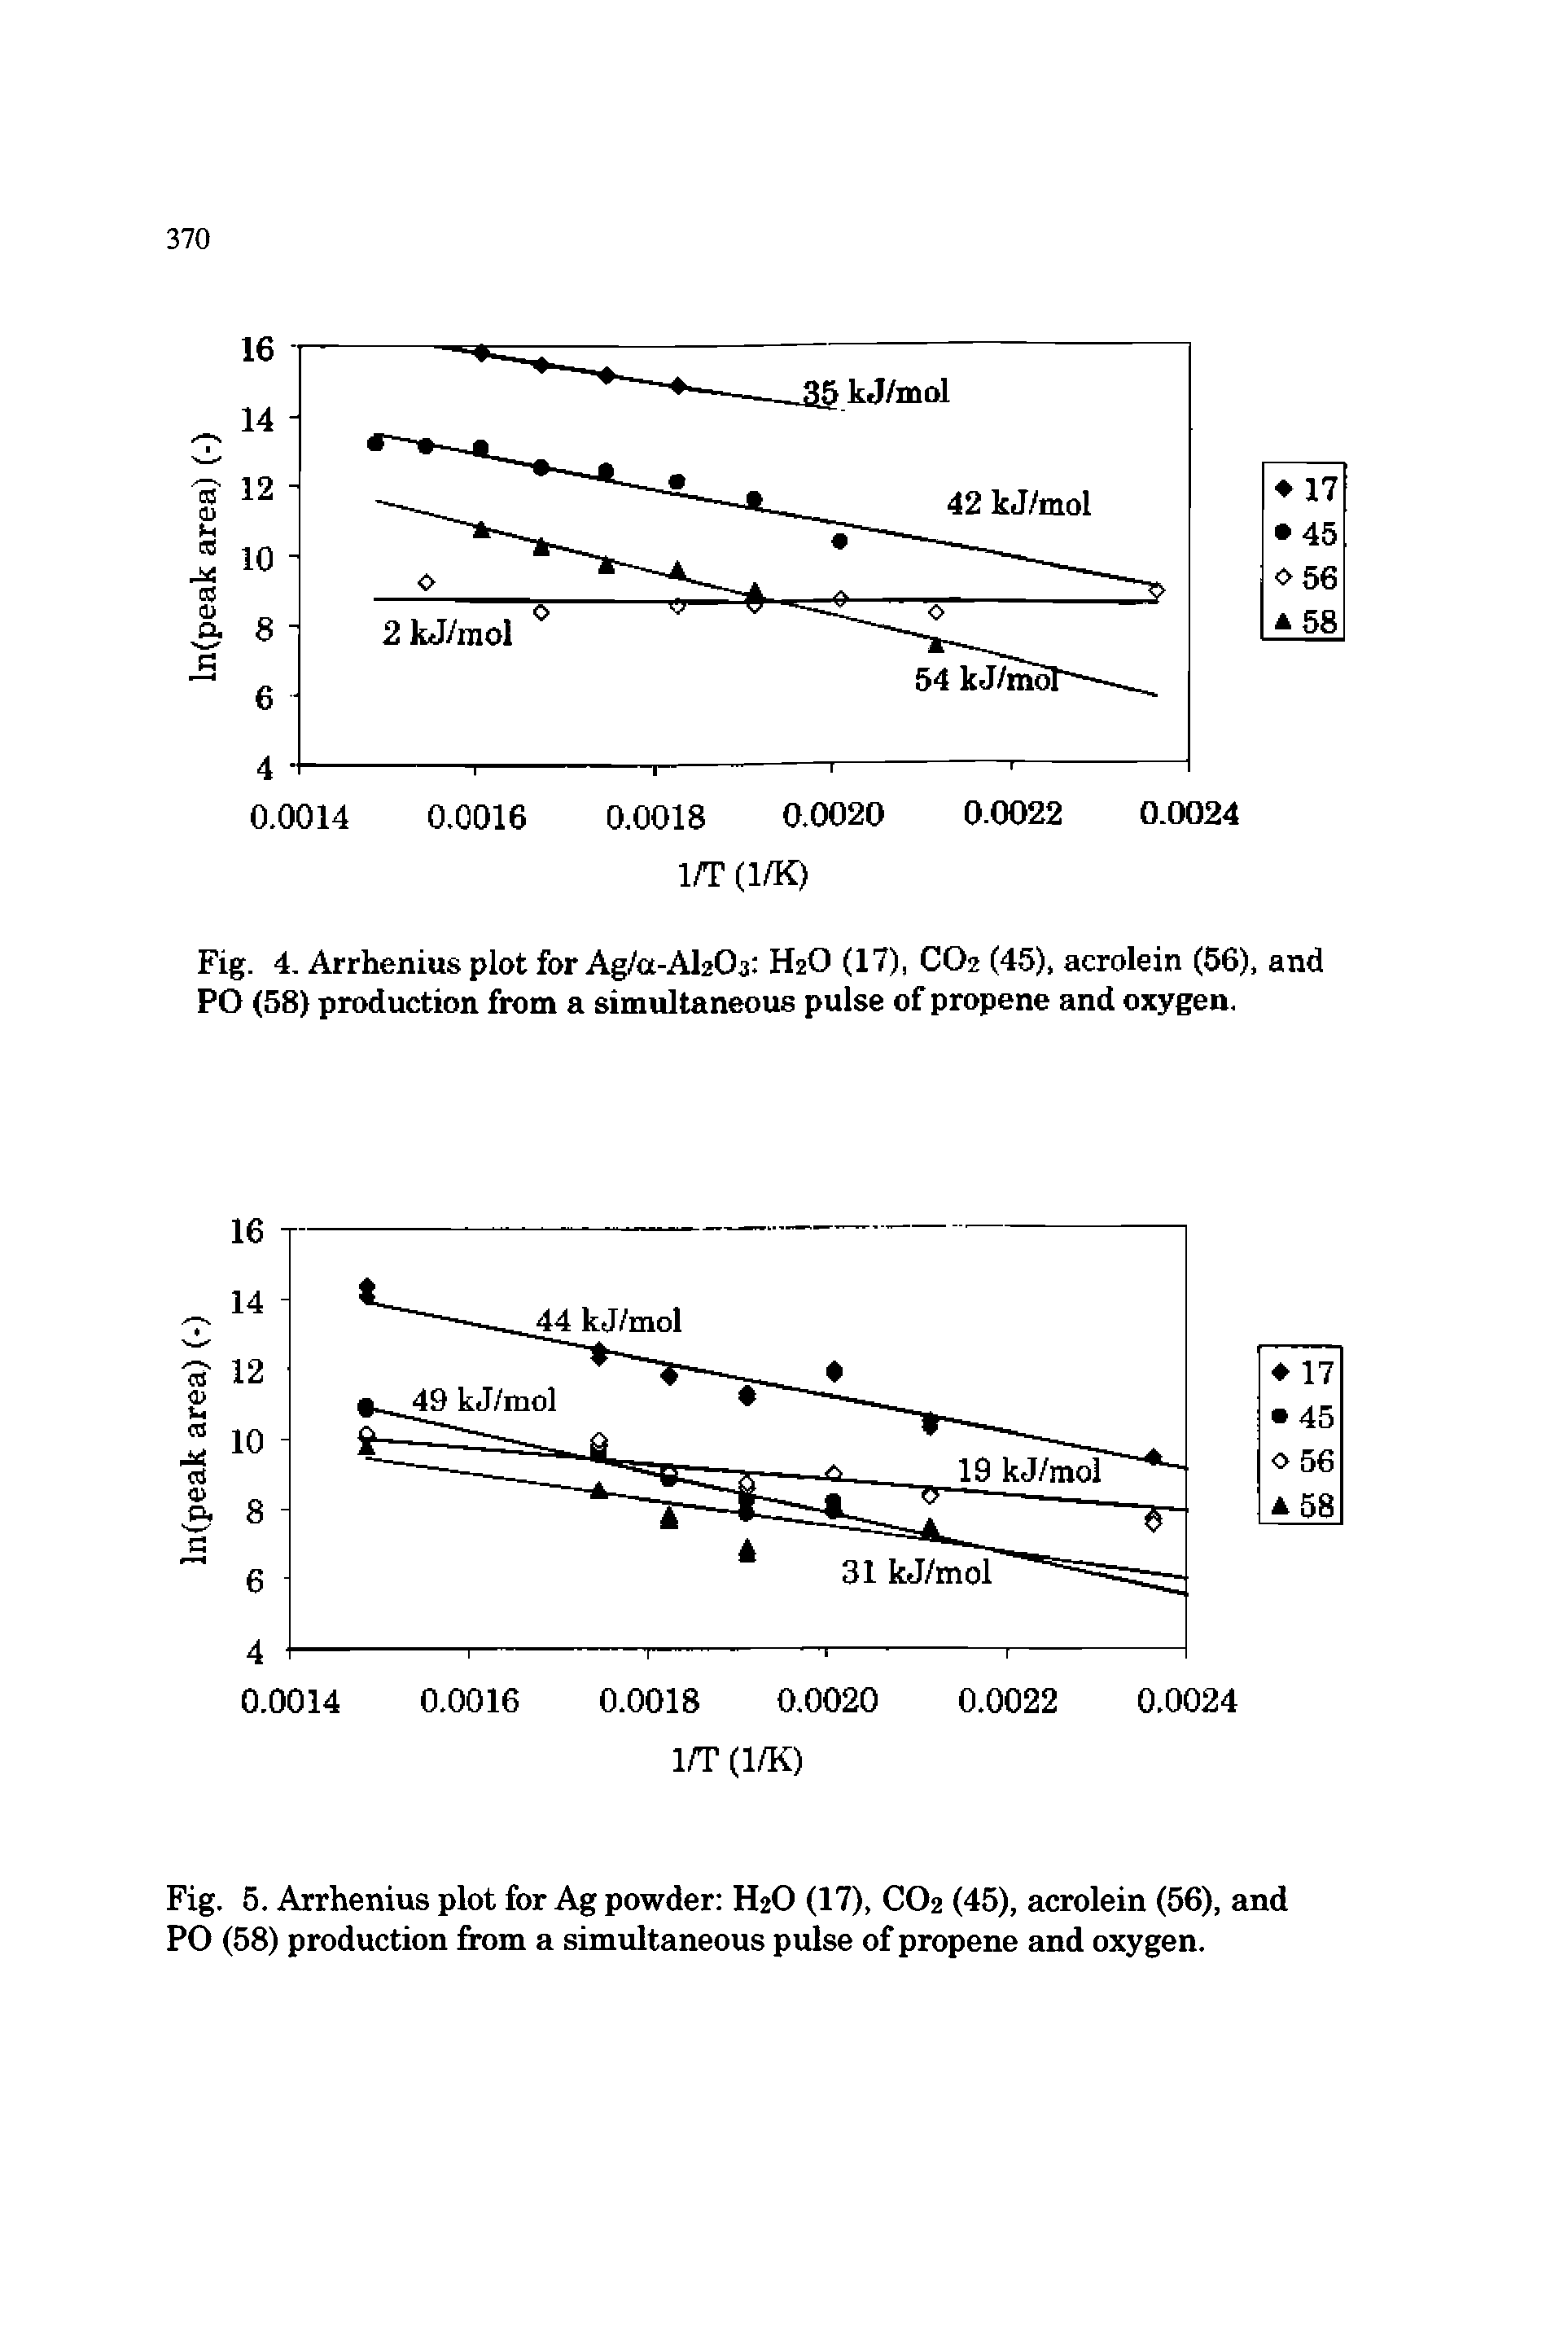 Fig. 4. Arrhenius plot for Ag/a-AbOj H2O (17), CO2 (45), acrolein (56), and PO (58) production from a simultaneous pulse of propene and oxygen.